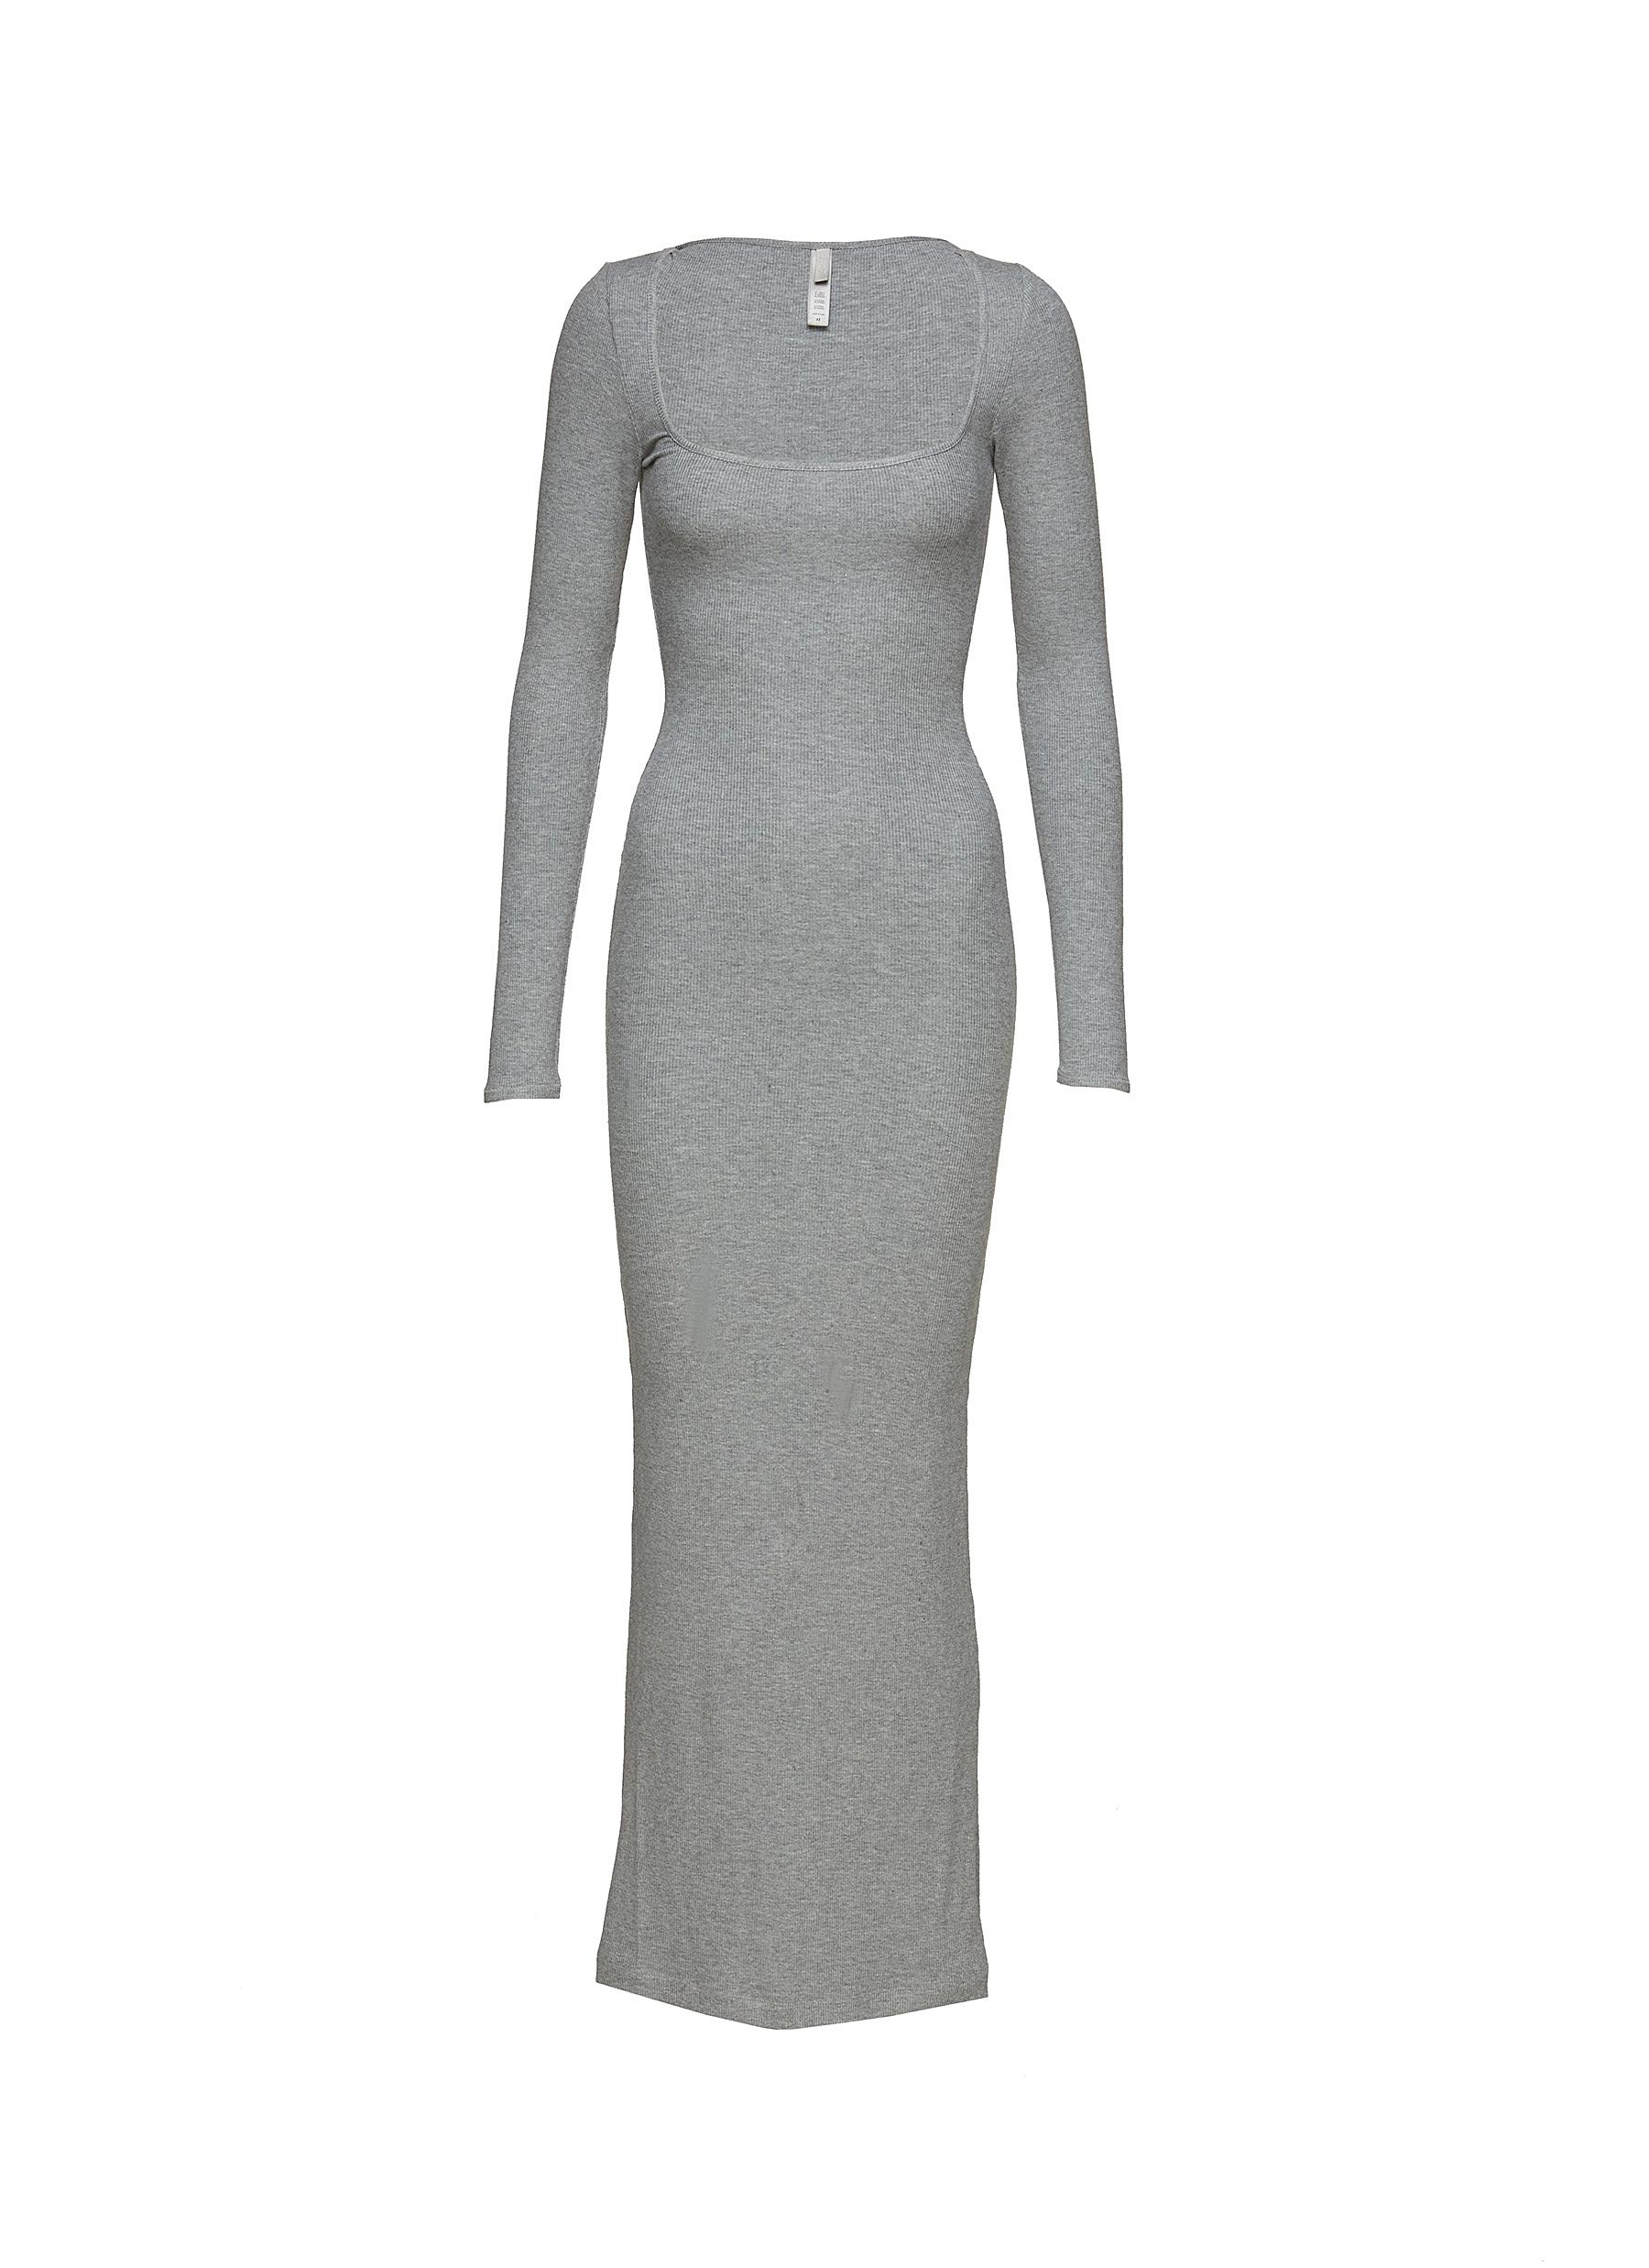 Shoppers Love the Skims Lounge Long Sleeve Ribbed Maxi Dress